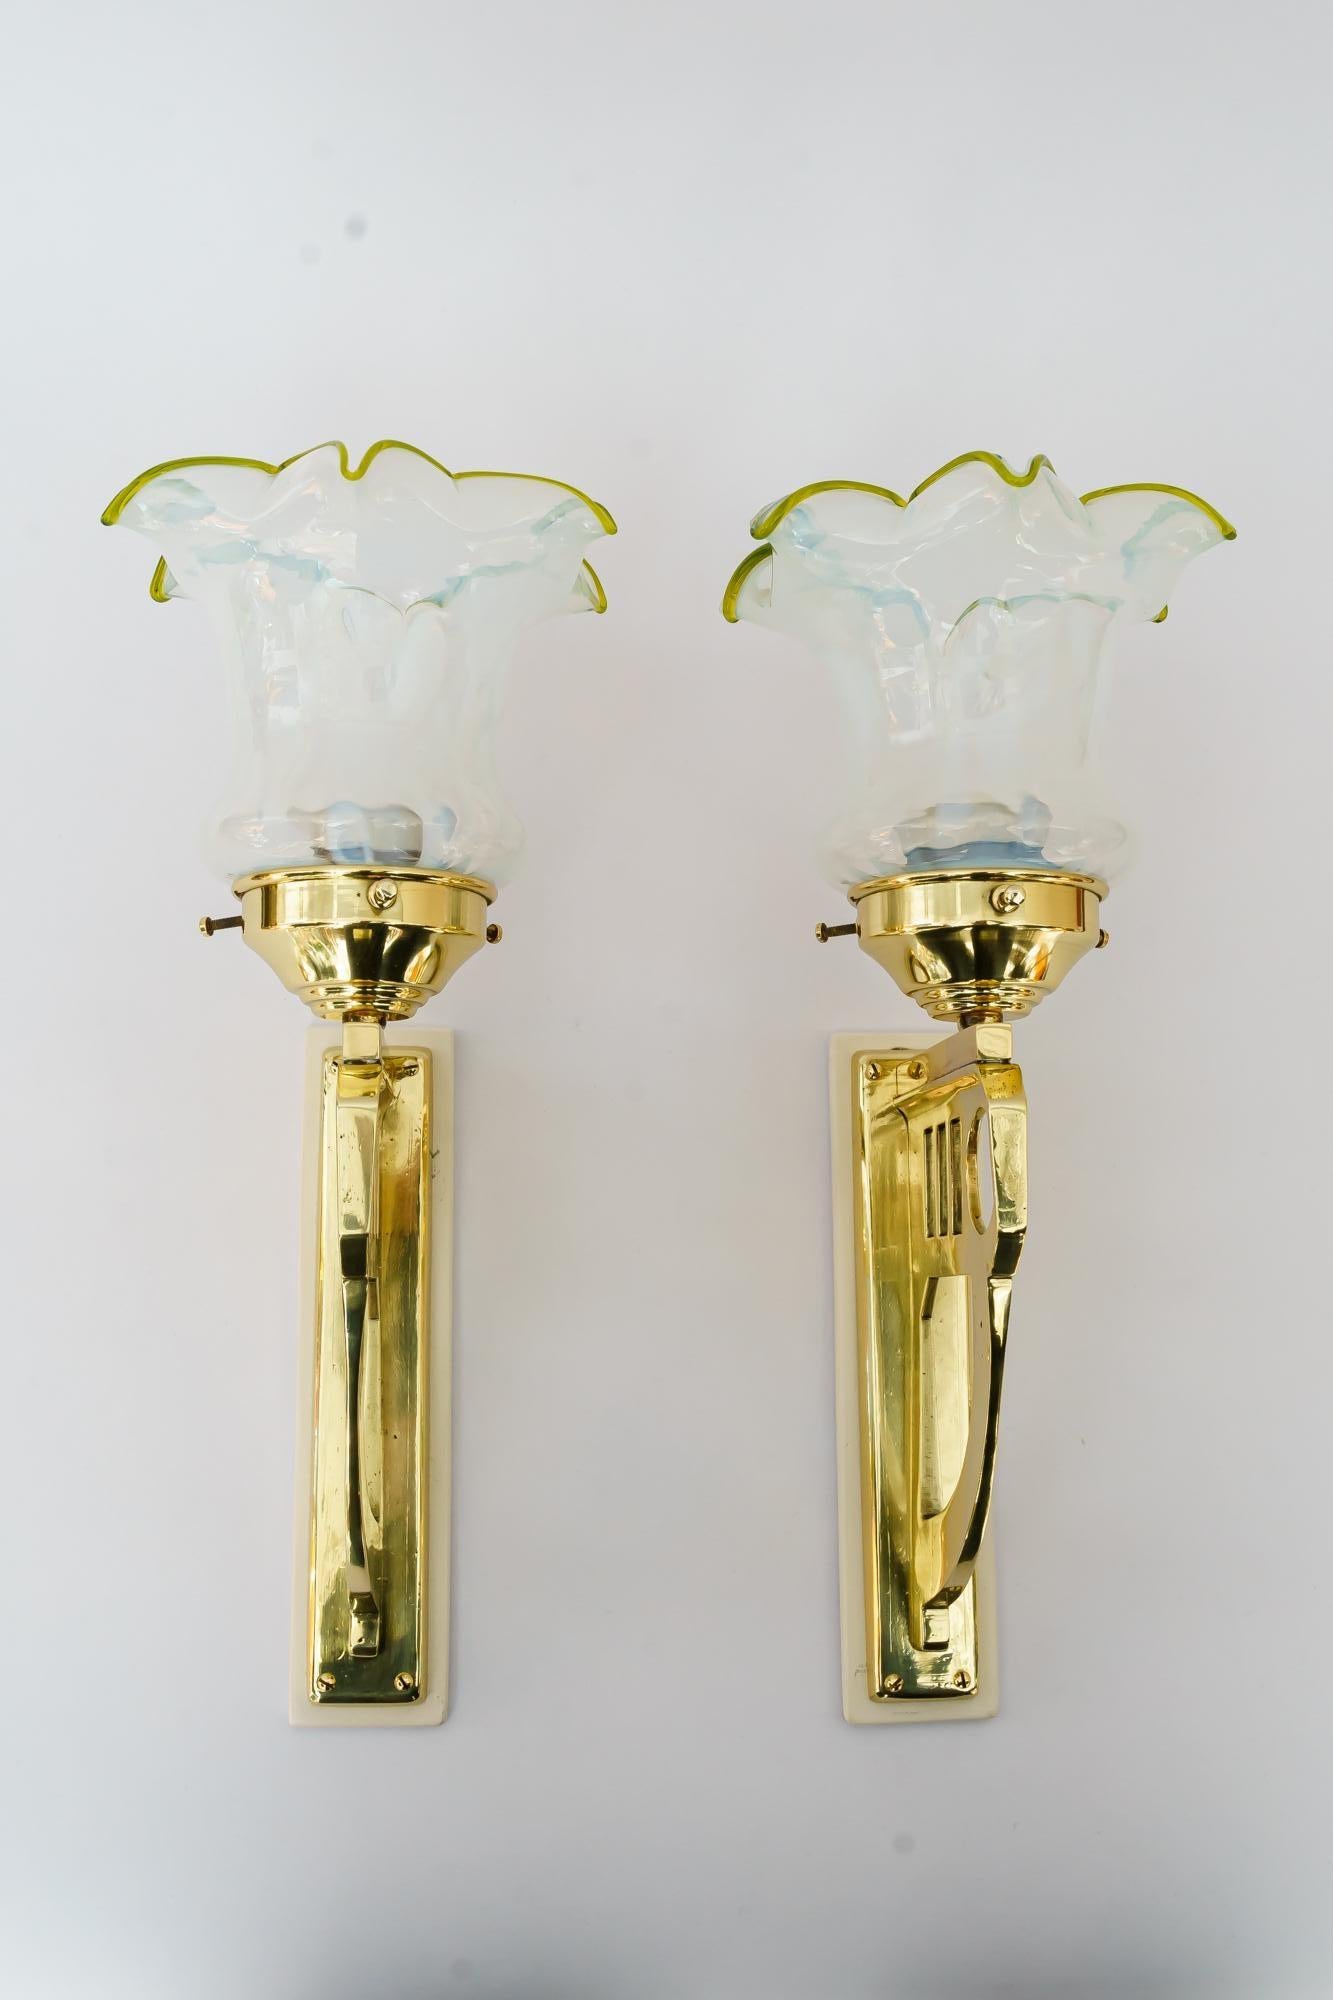 2 Art Deco wall lamps with original opaline glass shades vienna around 1920s
Brass polished and stove enameled
Original opaline glass shades.